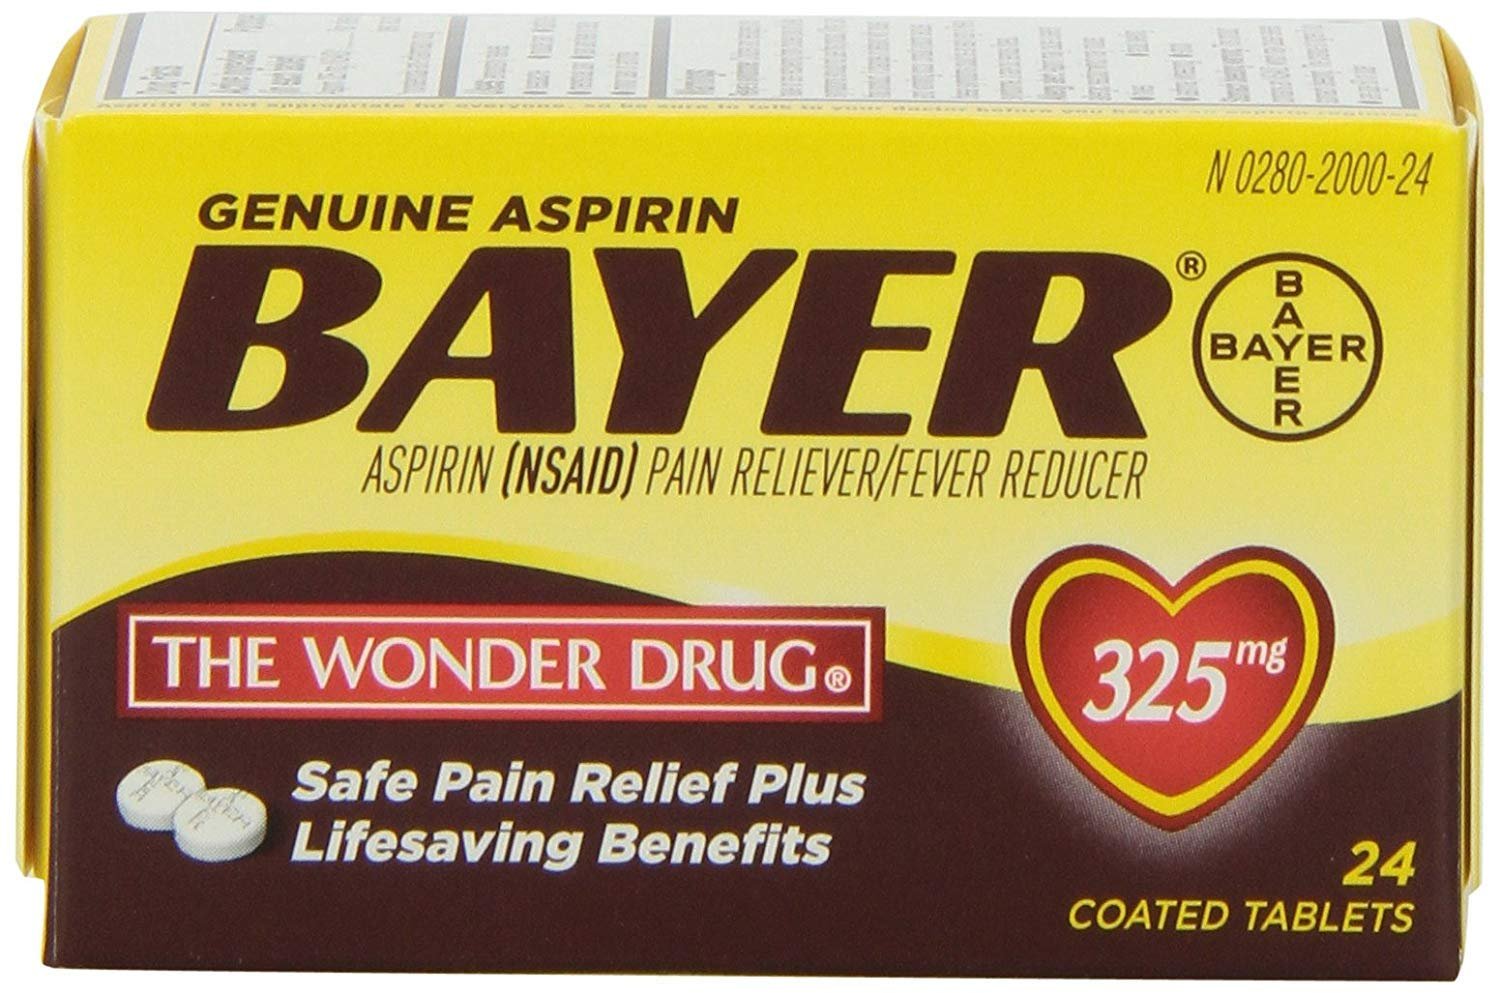 Genuine Bayer Aspirin 325mg Tablets, 24-Count (Pack of 2)